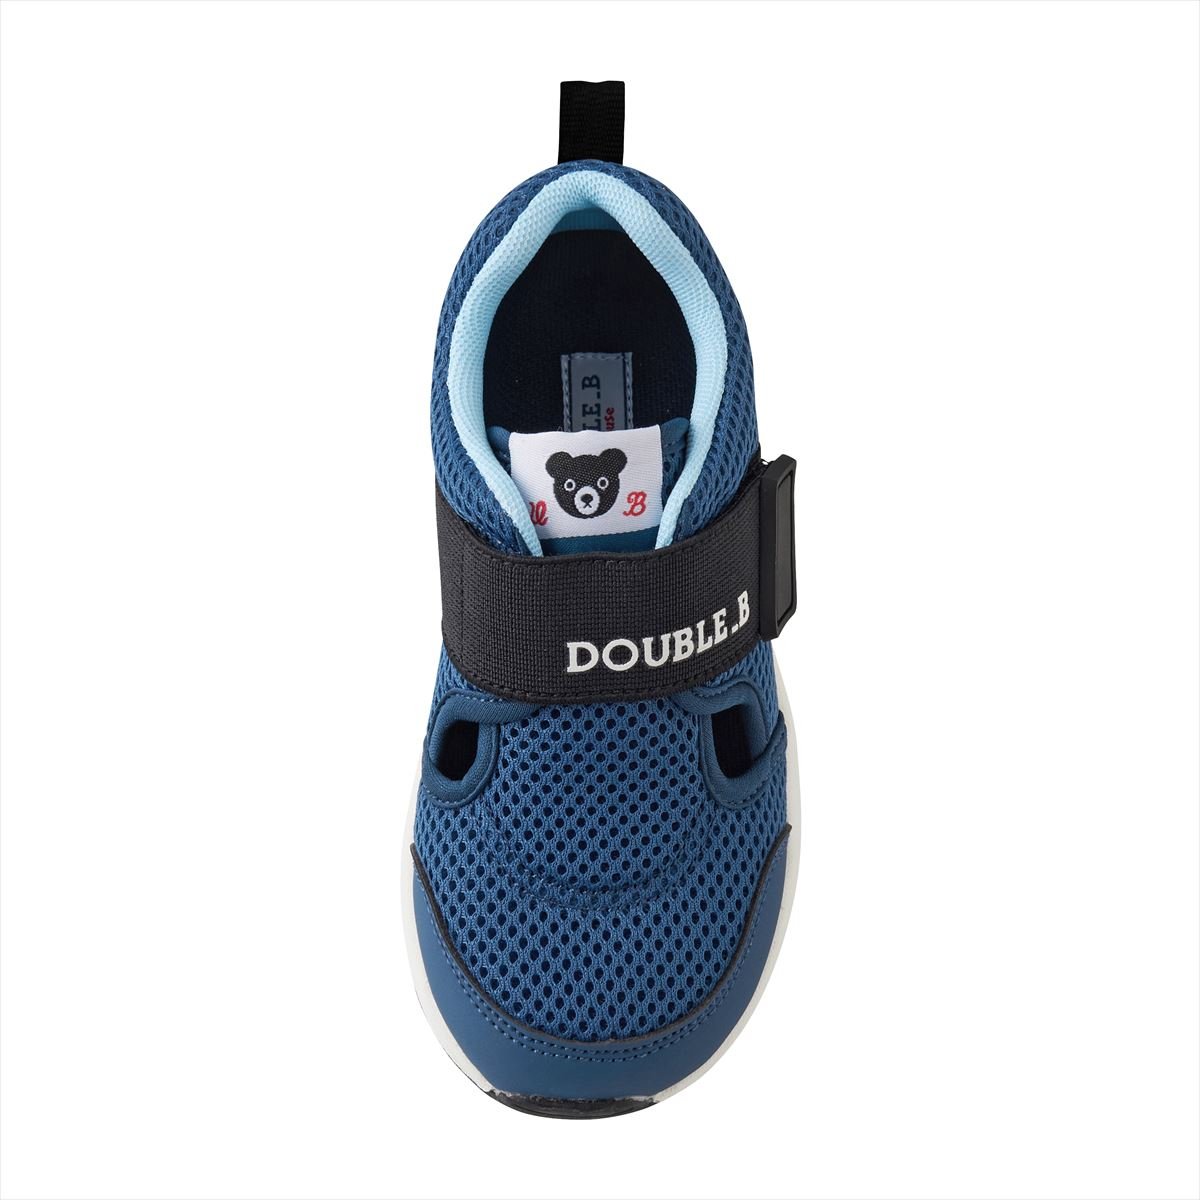 DOUBLE_B Double Russell Mesh Shoes - D for Dynamic - 62-9402-571-03-15